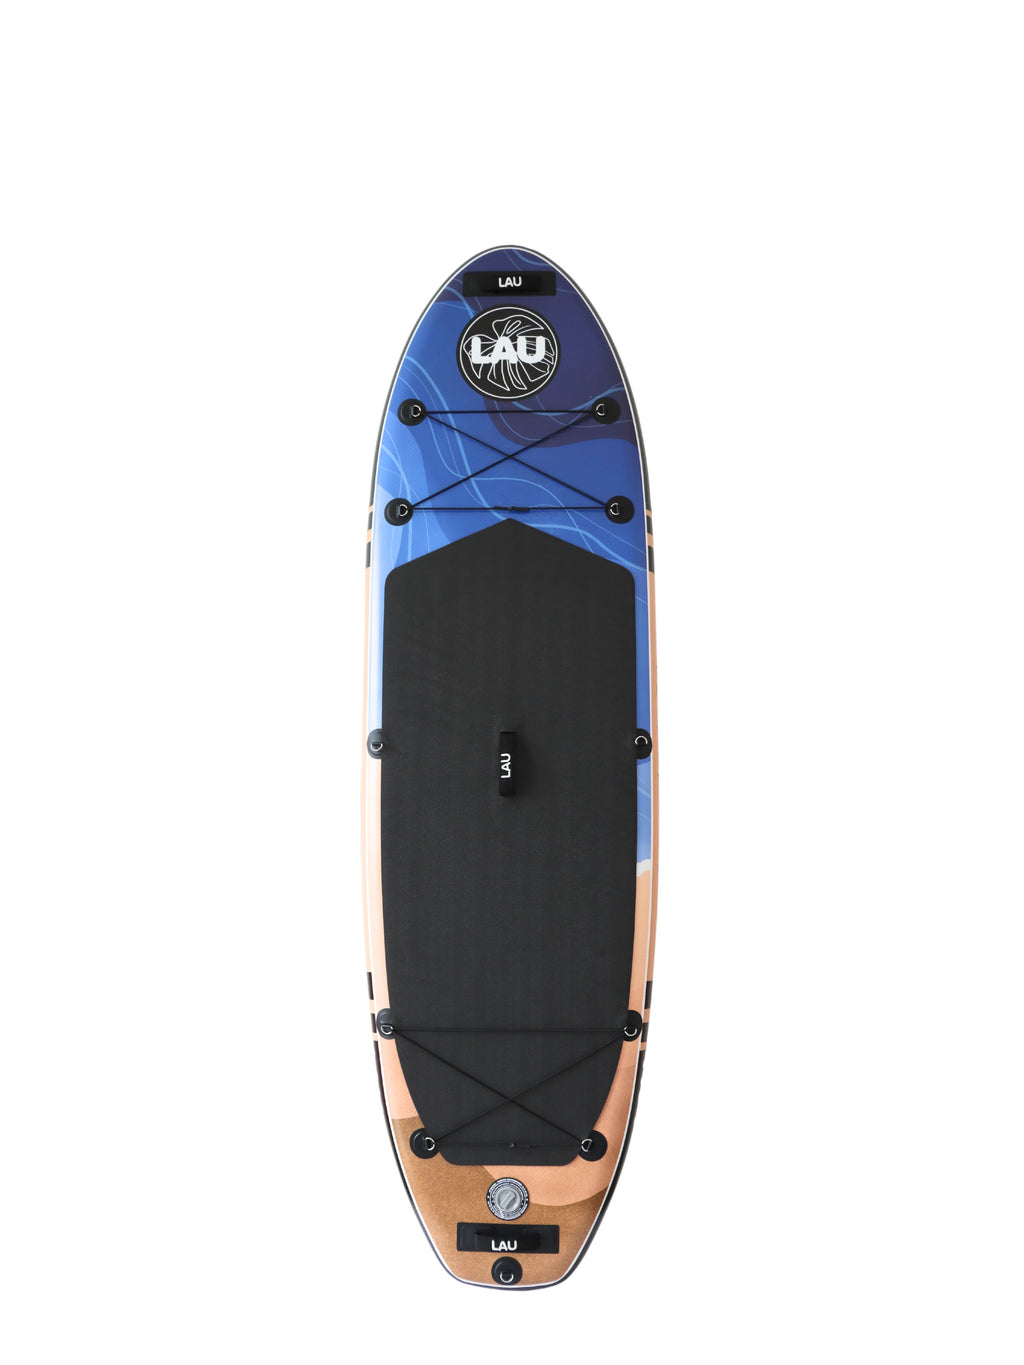 Coastal 2.0- 9'2 All-around- Inflatable paddle board